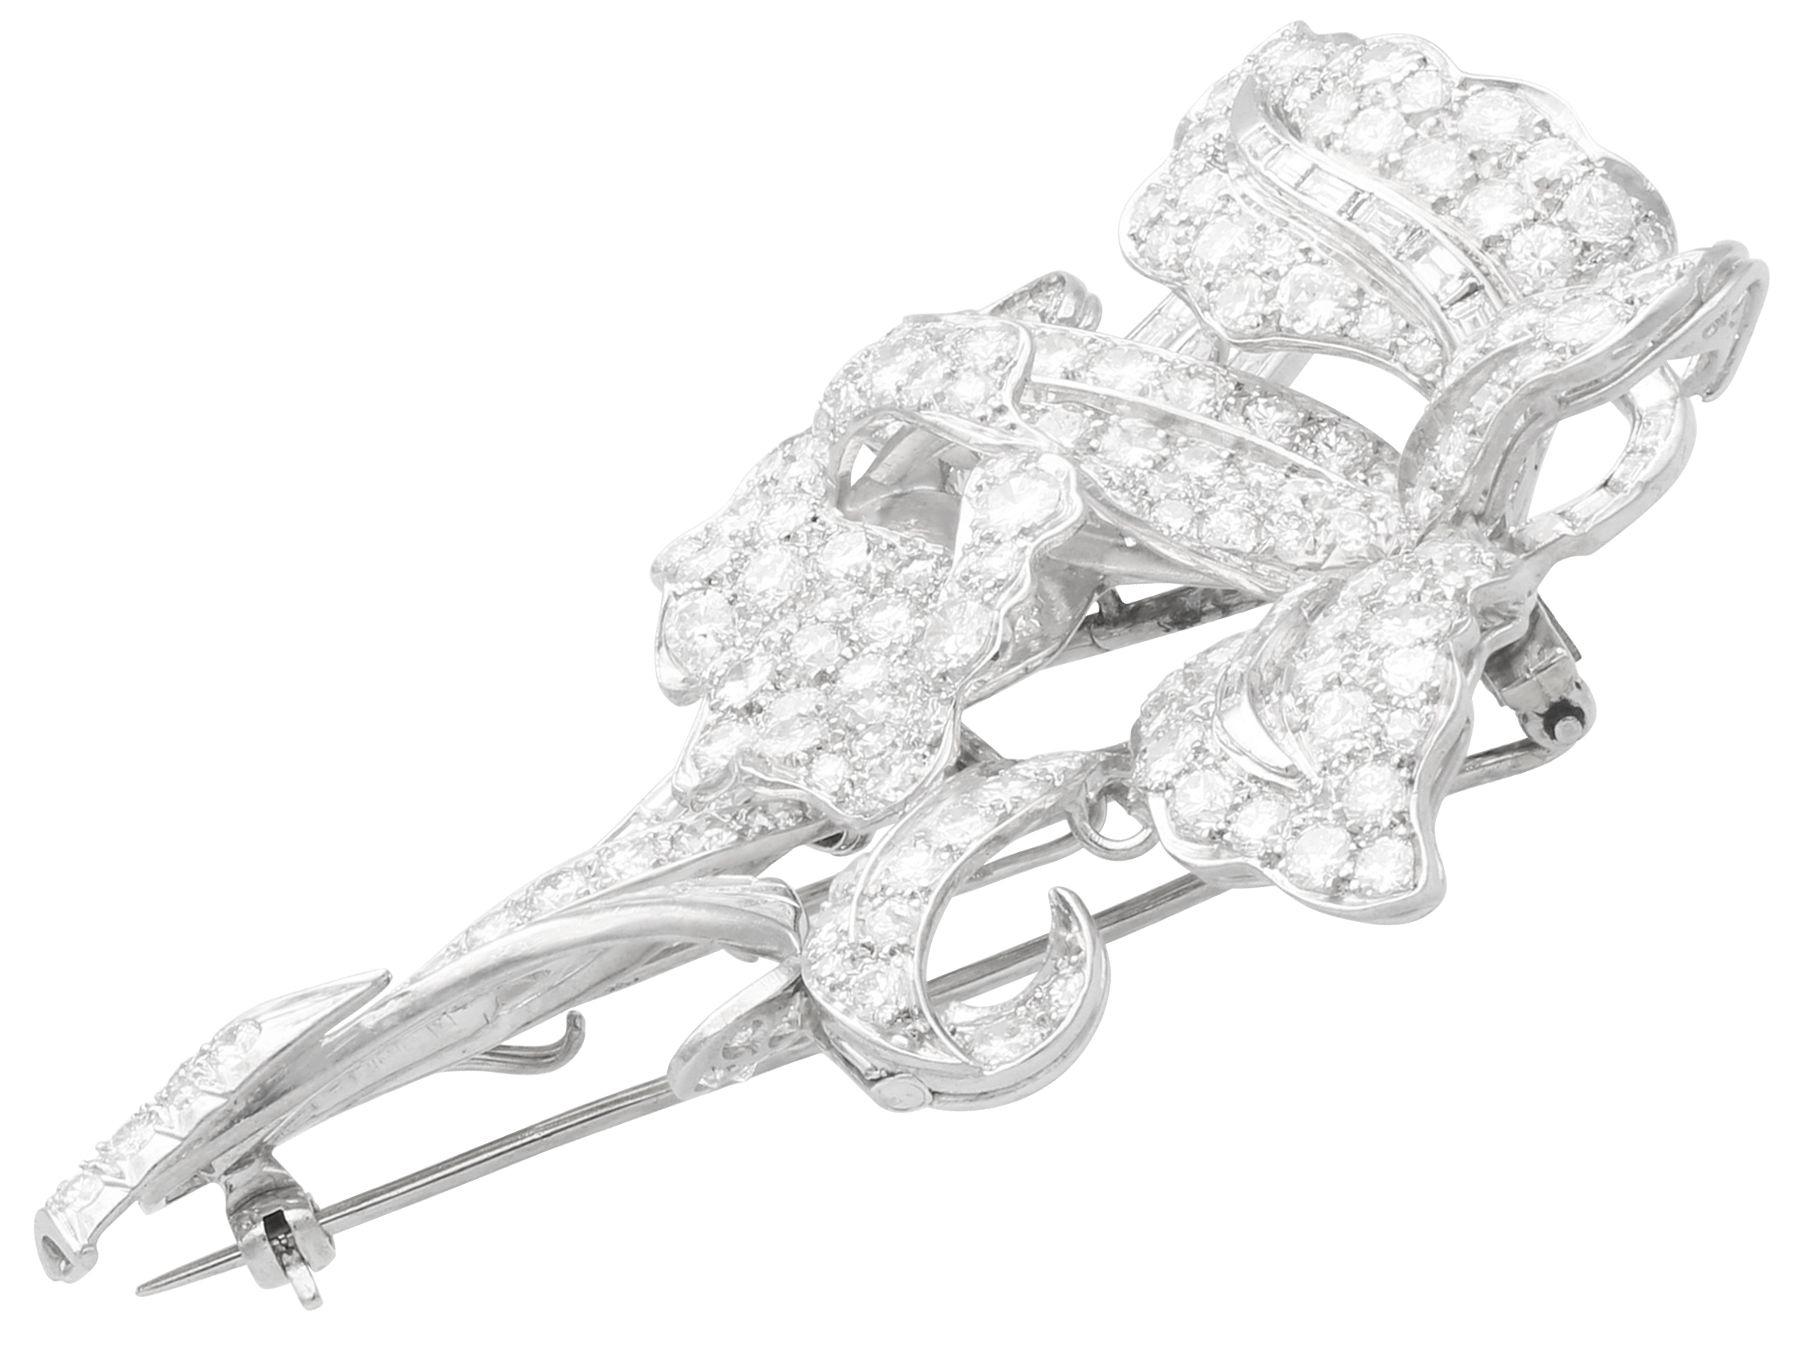 Antique 15.32 Carat Diamond and Platinum Floral Brooch, Circa 1935 In Excellent Condition For Sale In Jesmond, Newcastle Upon Tyne